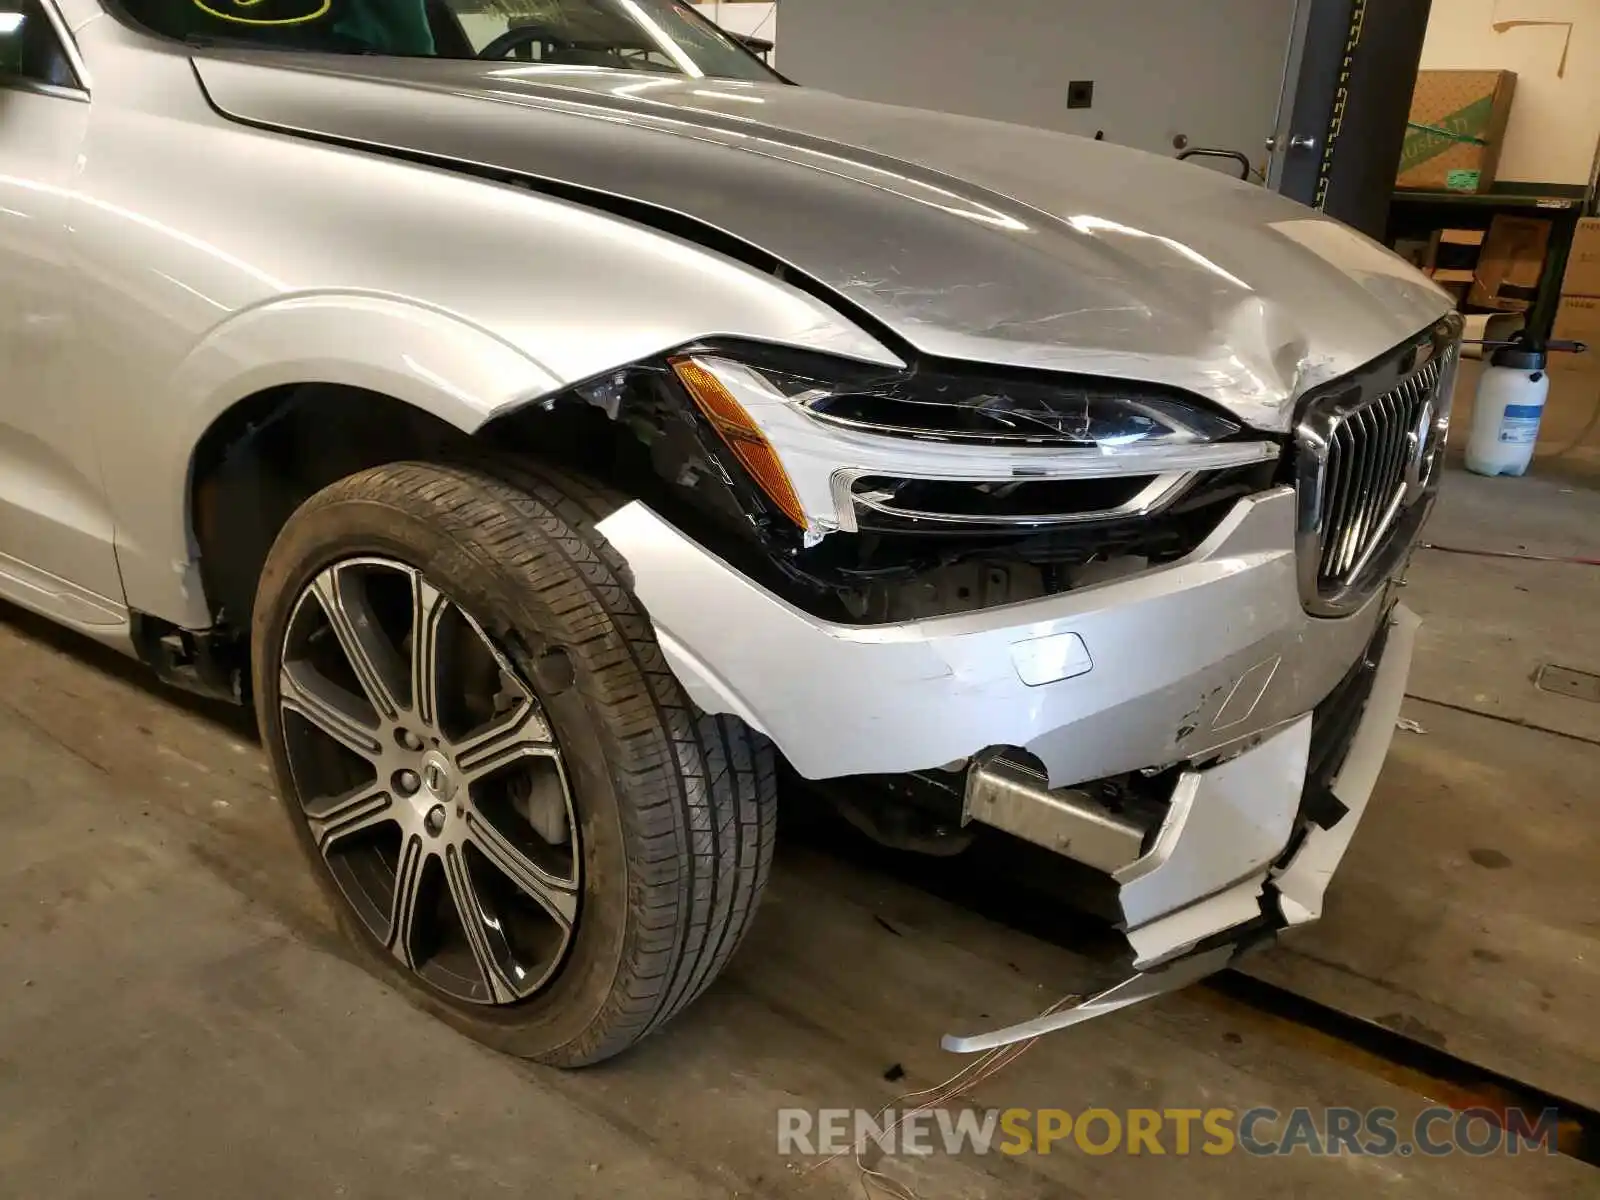 9 Photograph of a damaged car YV4A22RL7K1291629 VOLVO XC60 T6 IN 2019